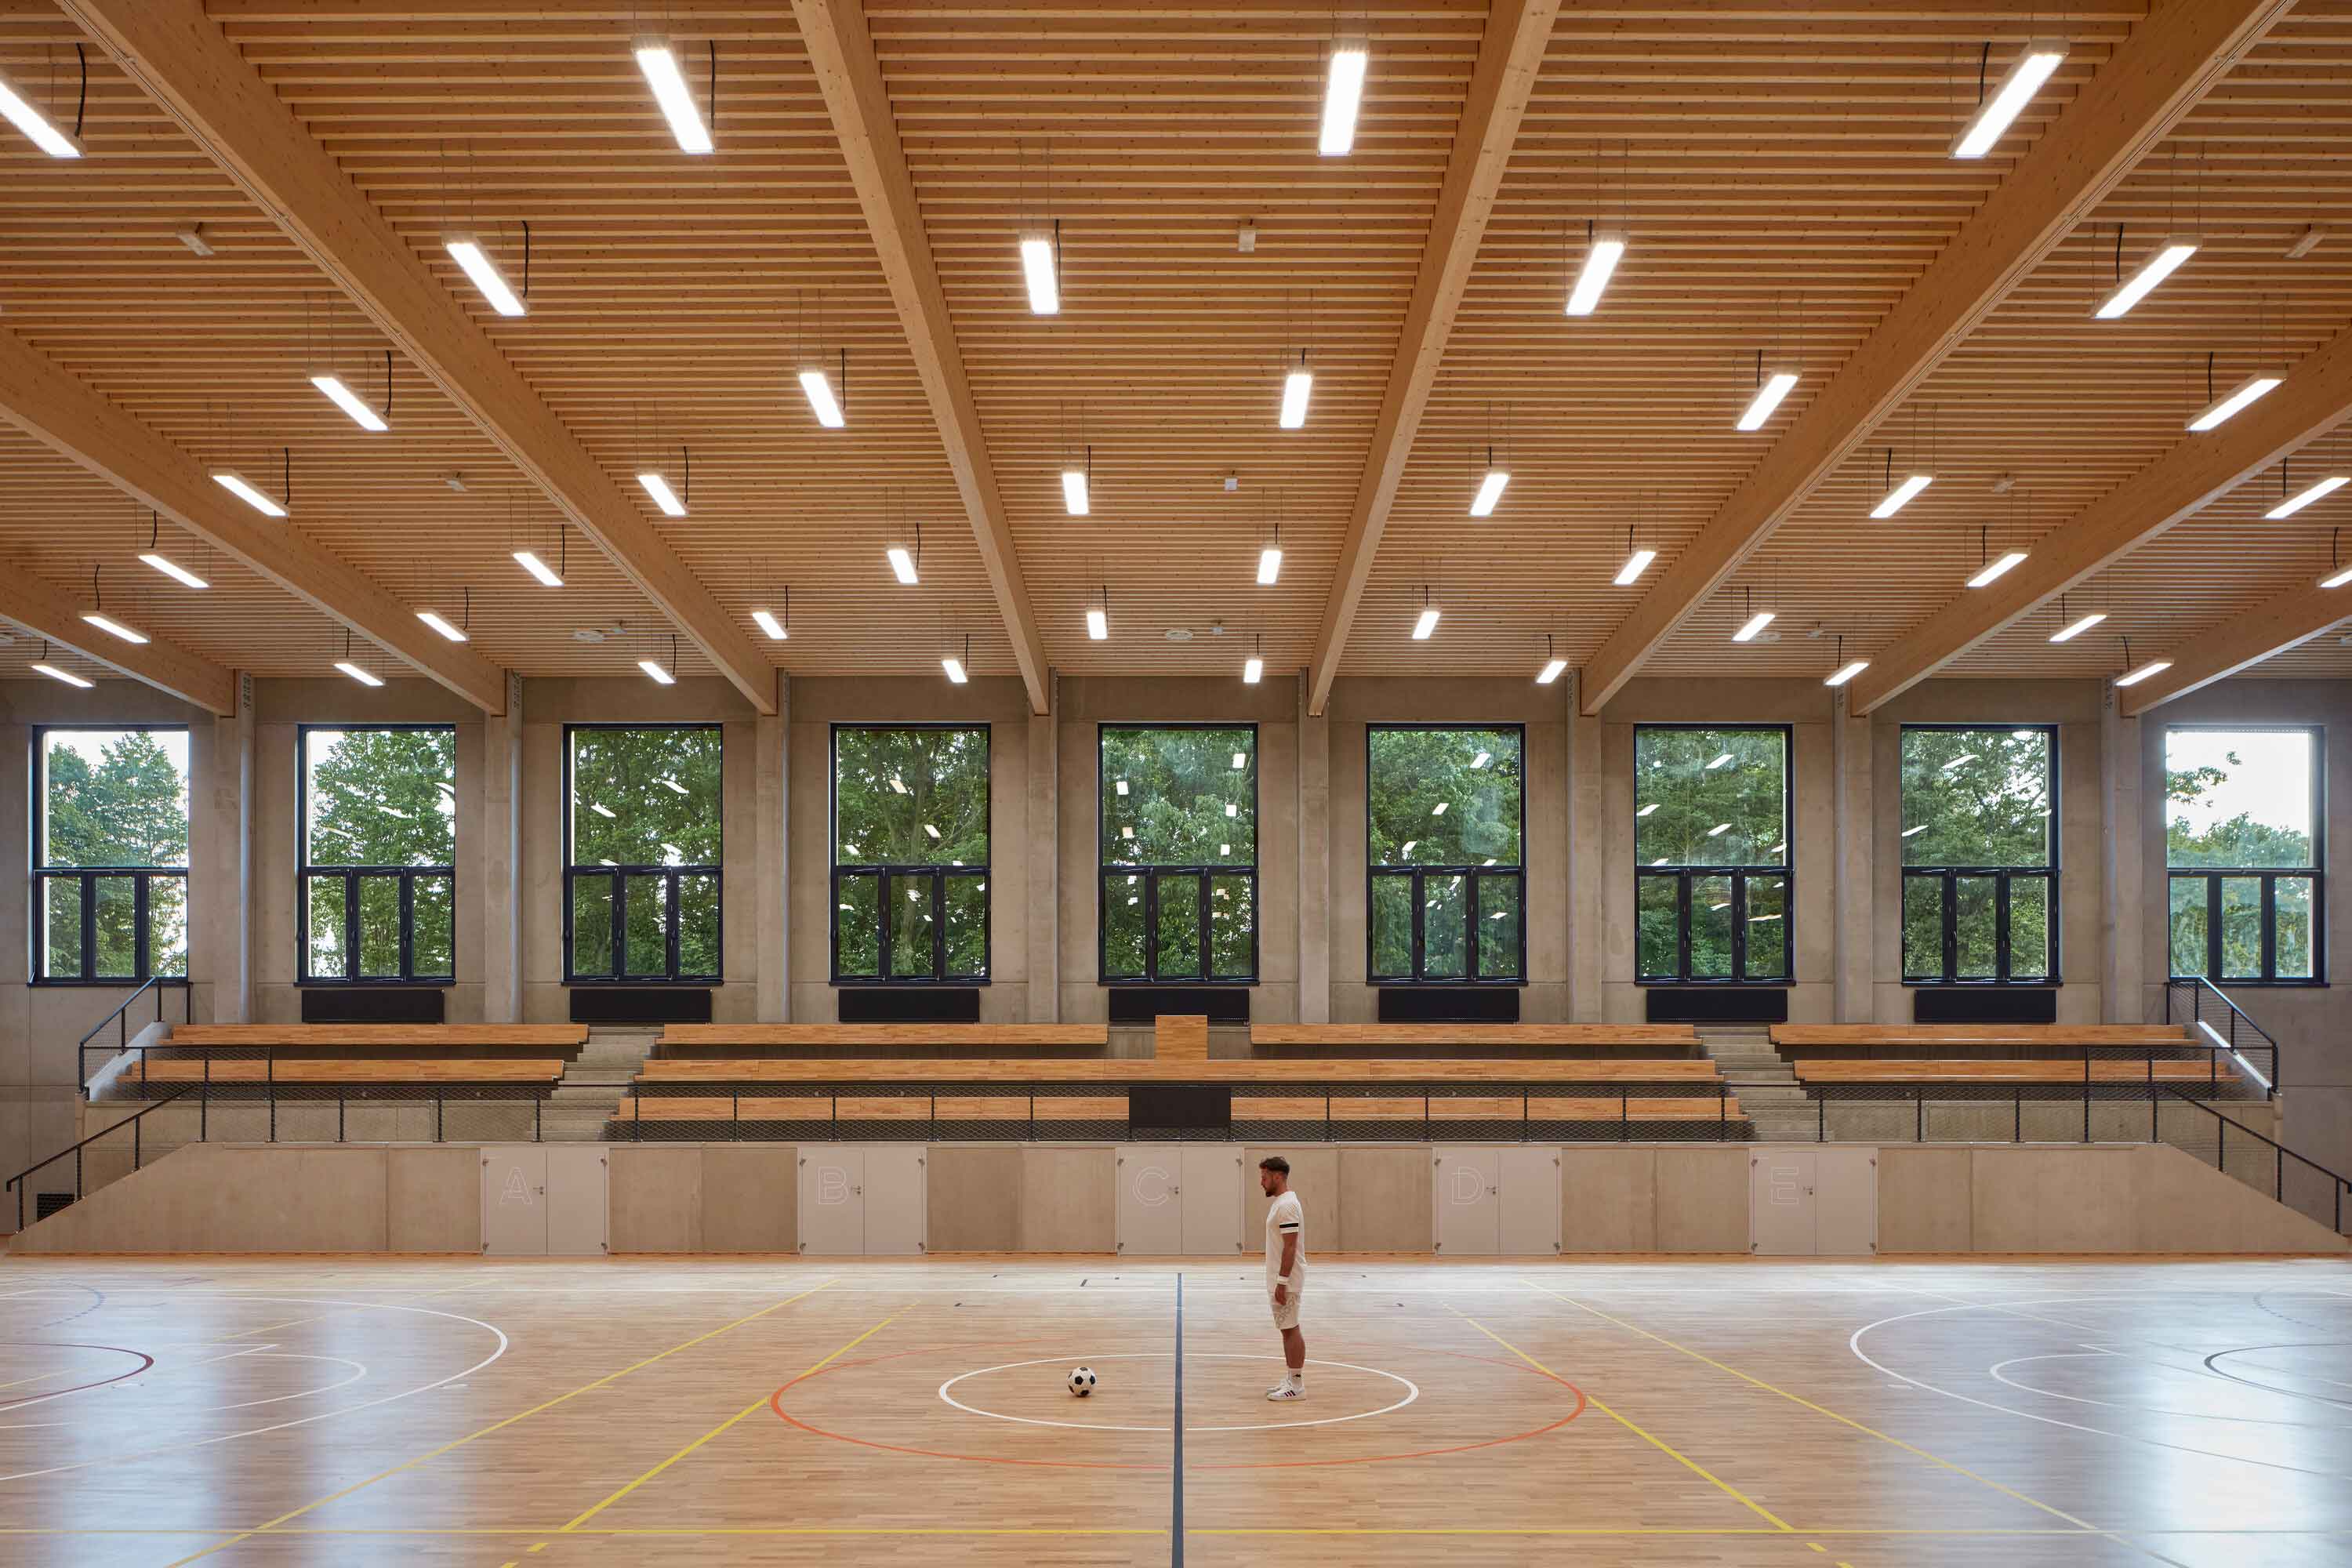 An ultra-sustainable sports centre in Borky, on the Elbe river